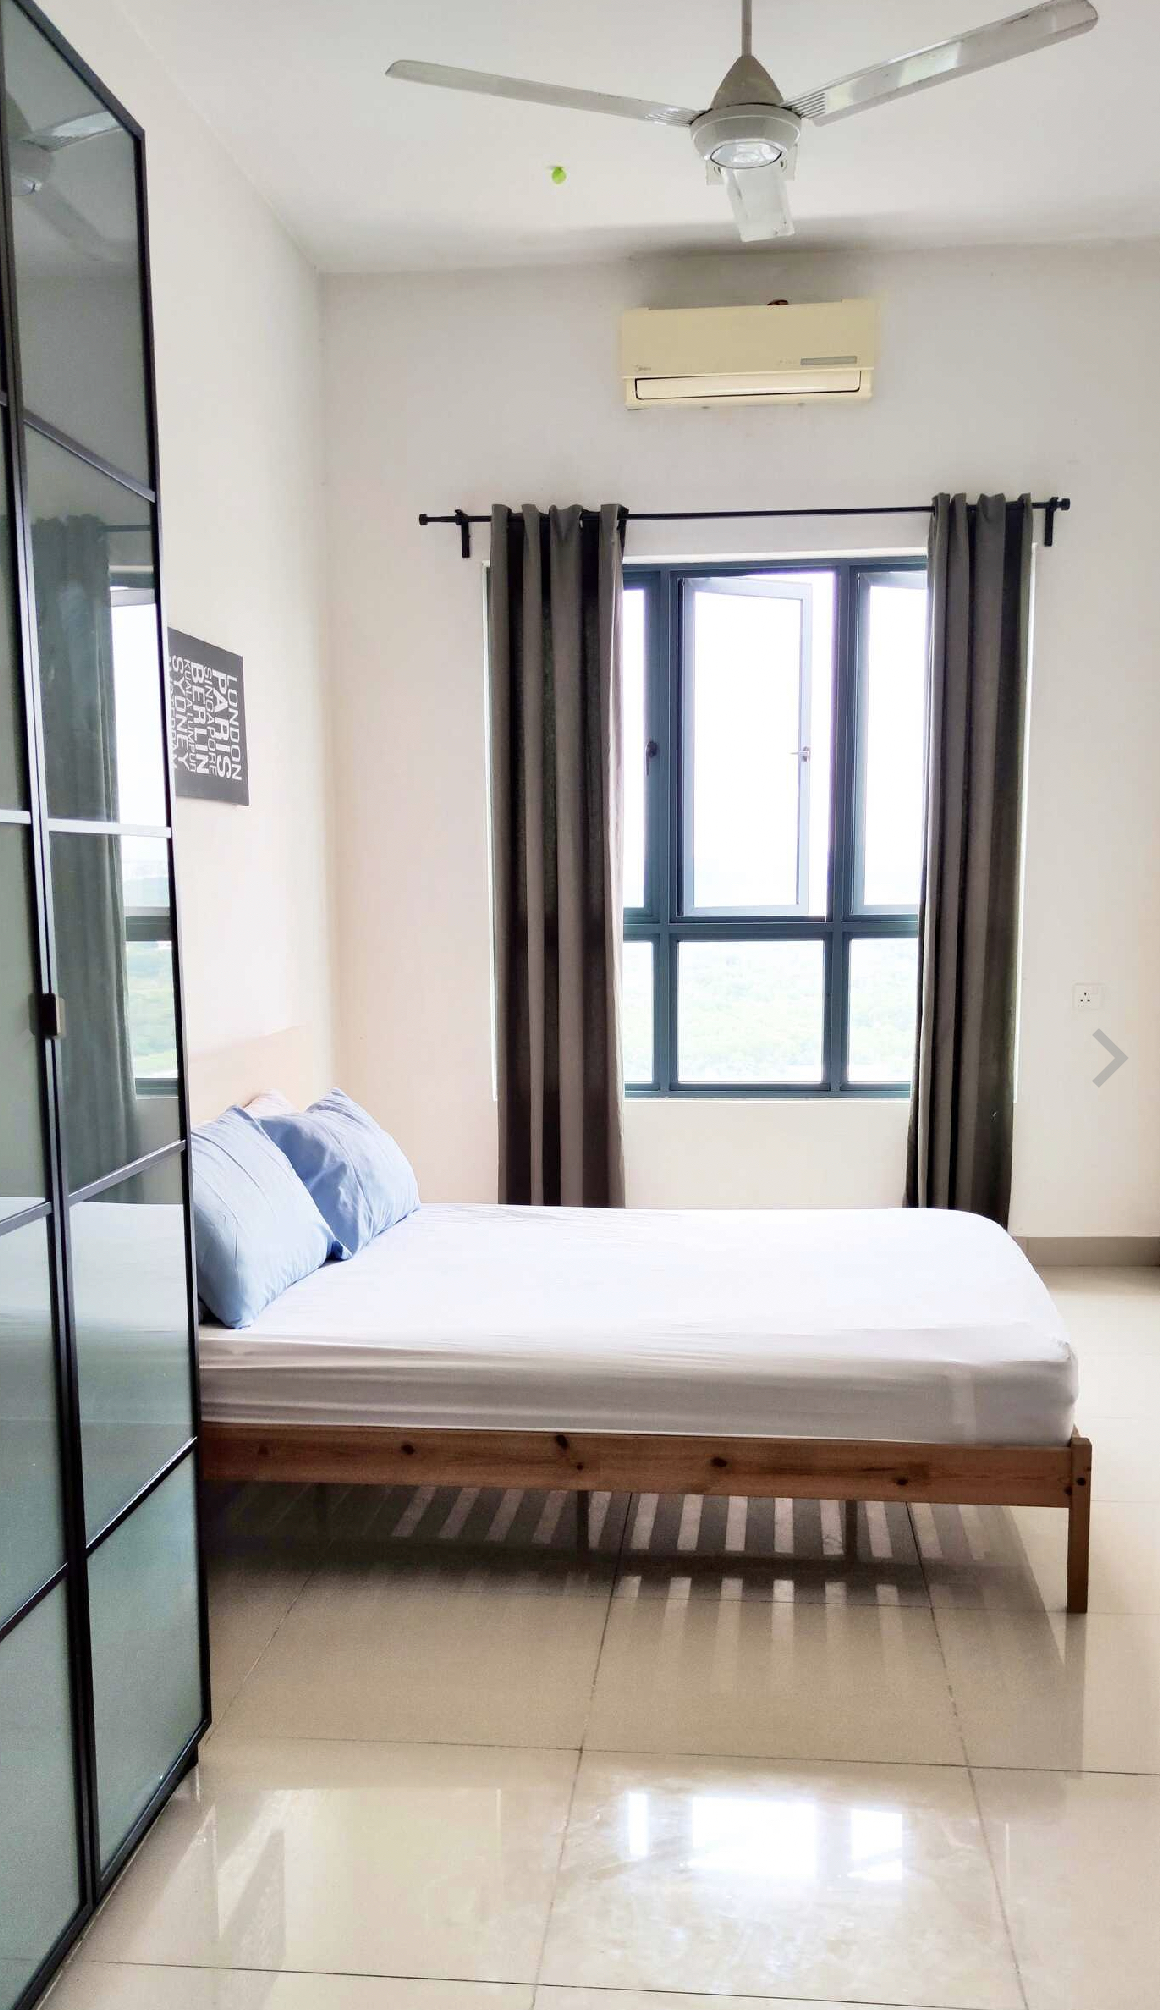 room for rent, studio, bandar bukit puchong 2, !!!!!!fully furnished studio unit non sharing pet allowed whatsapp @ zero,one,seven,seven,four,three,five,two, seven,one